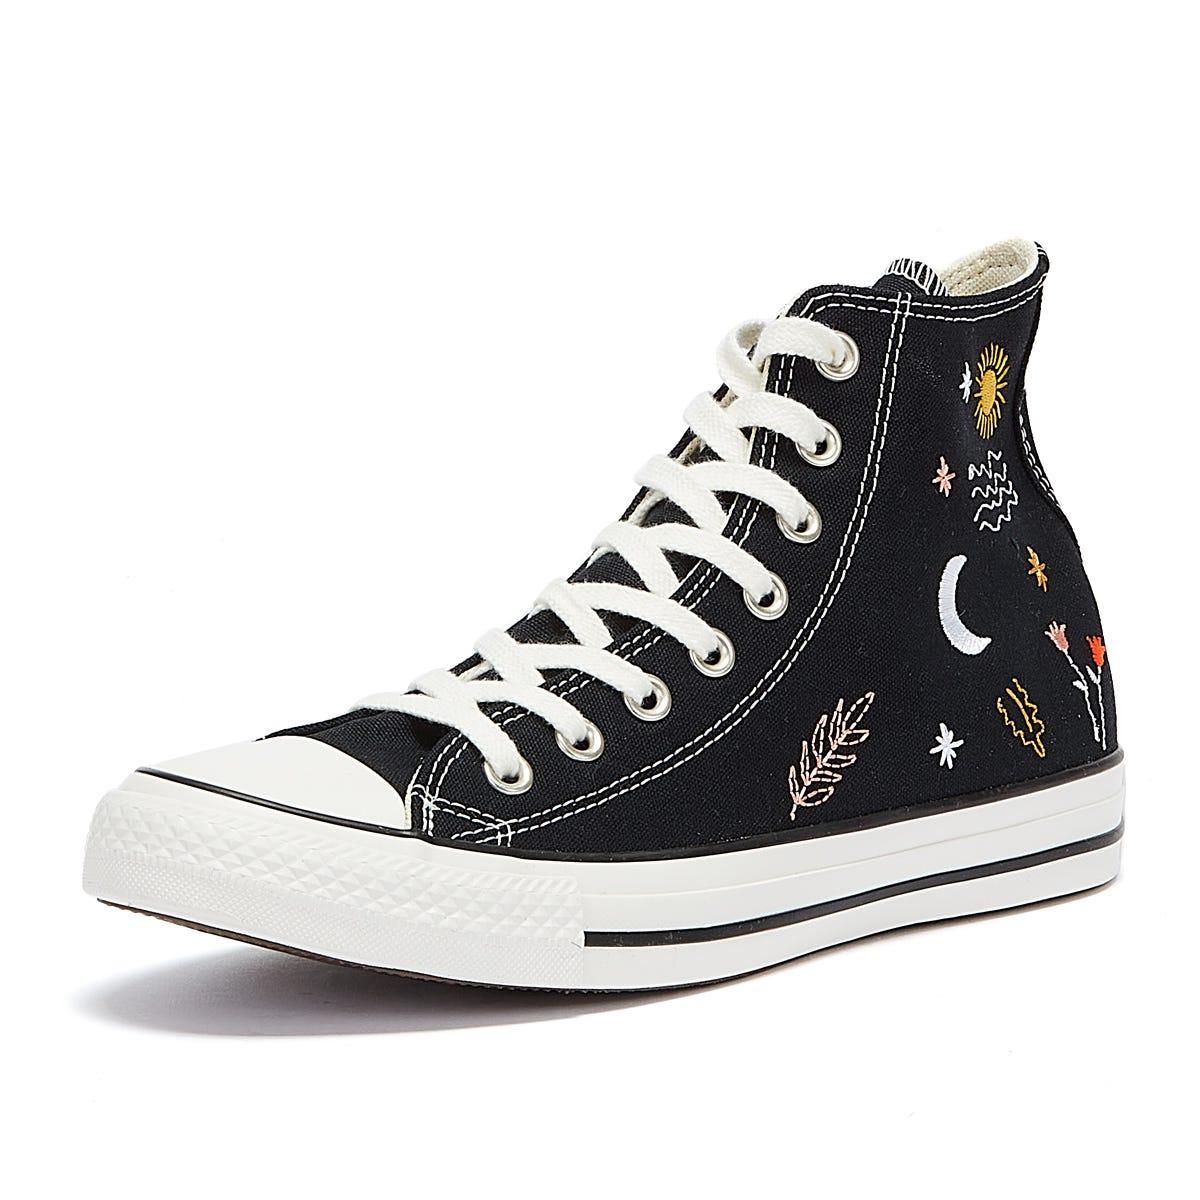 Converse All Star It's Ok To Wander Hi Womens Black / White Trainers - Lyst